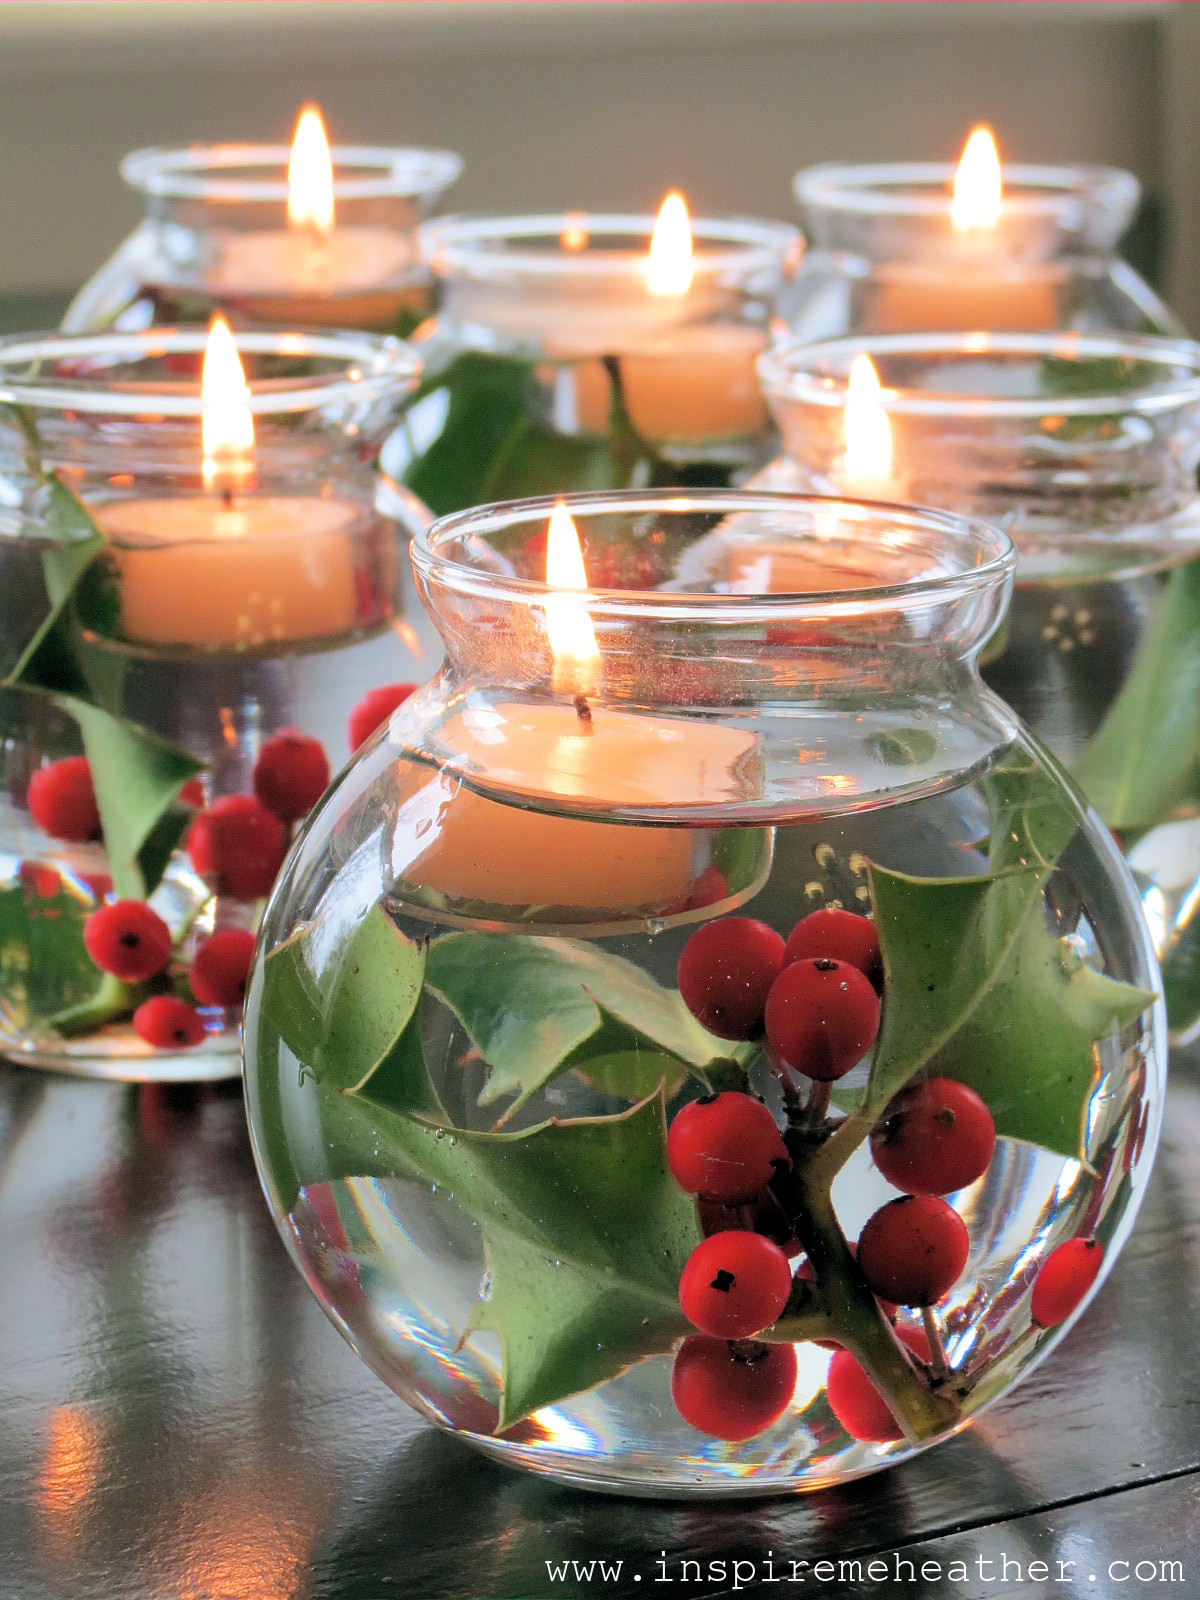 DIY Christmas Table Decorations
 17 Easy Last Minute DIY Christmas Decorations Style